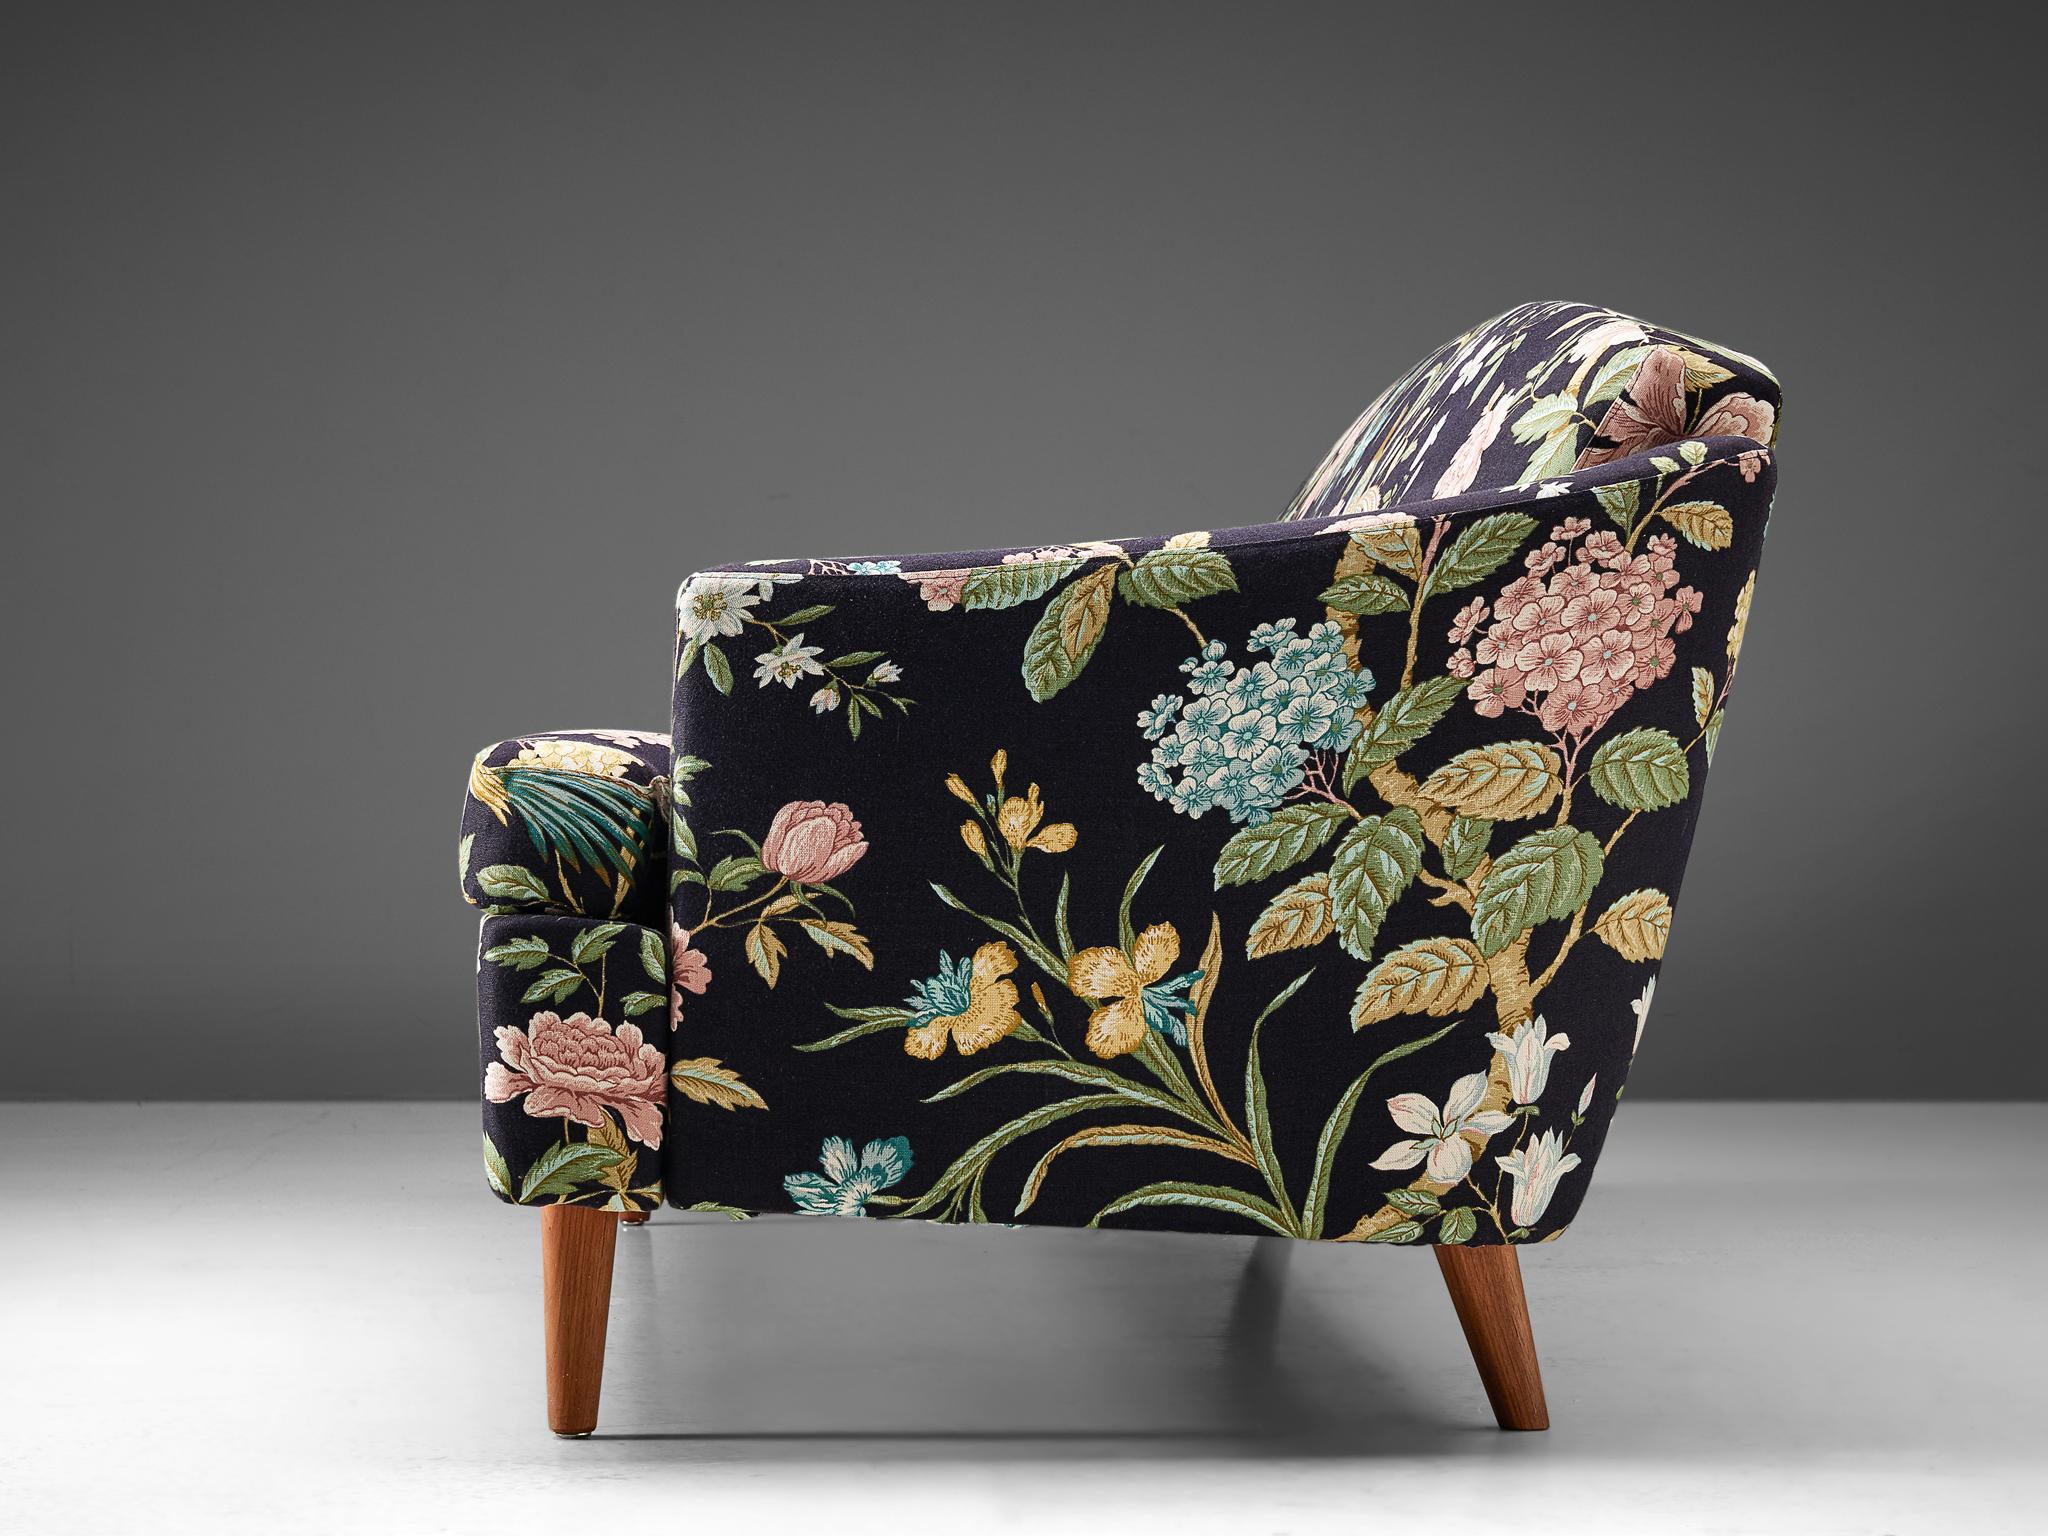 Mid-20th Century Danish Sofa in Floral Upholstery